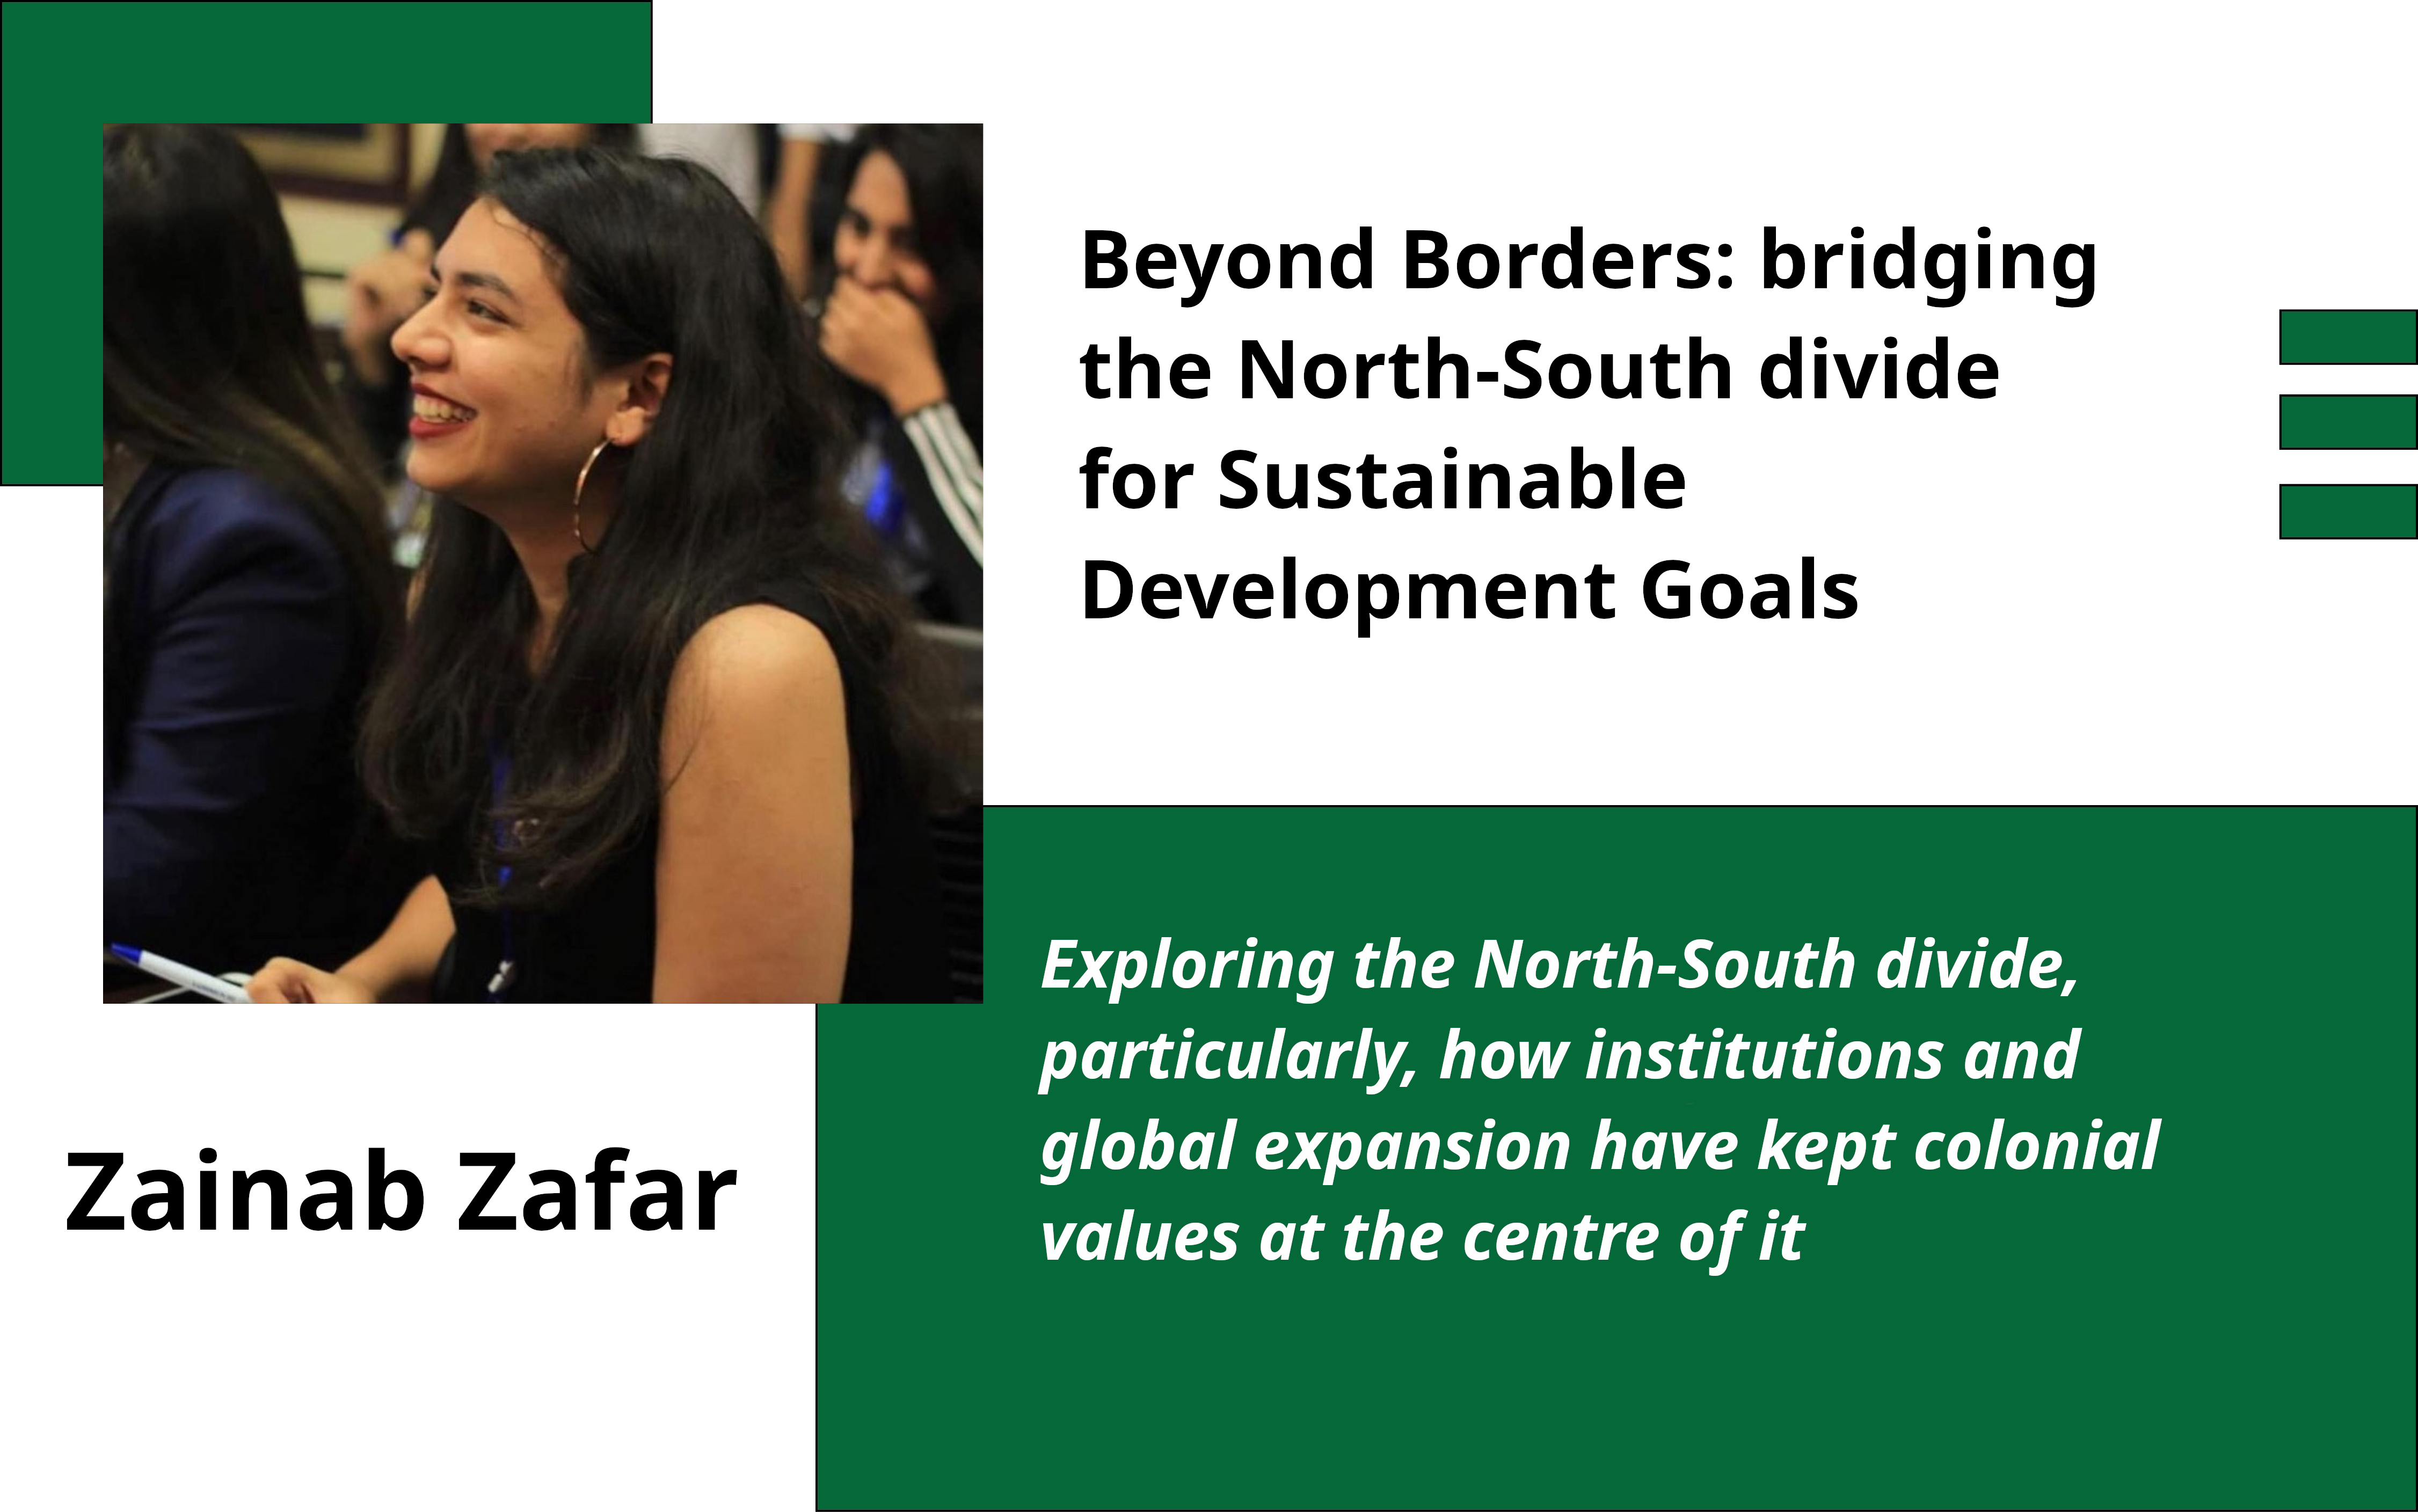 Beyond Borders: bridging the North-South divide for Sustainable Development Goals